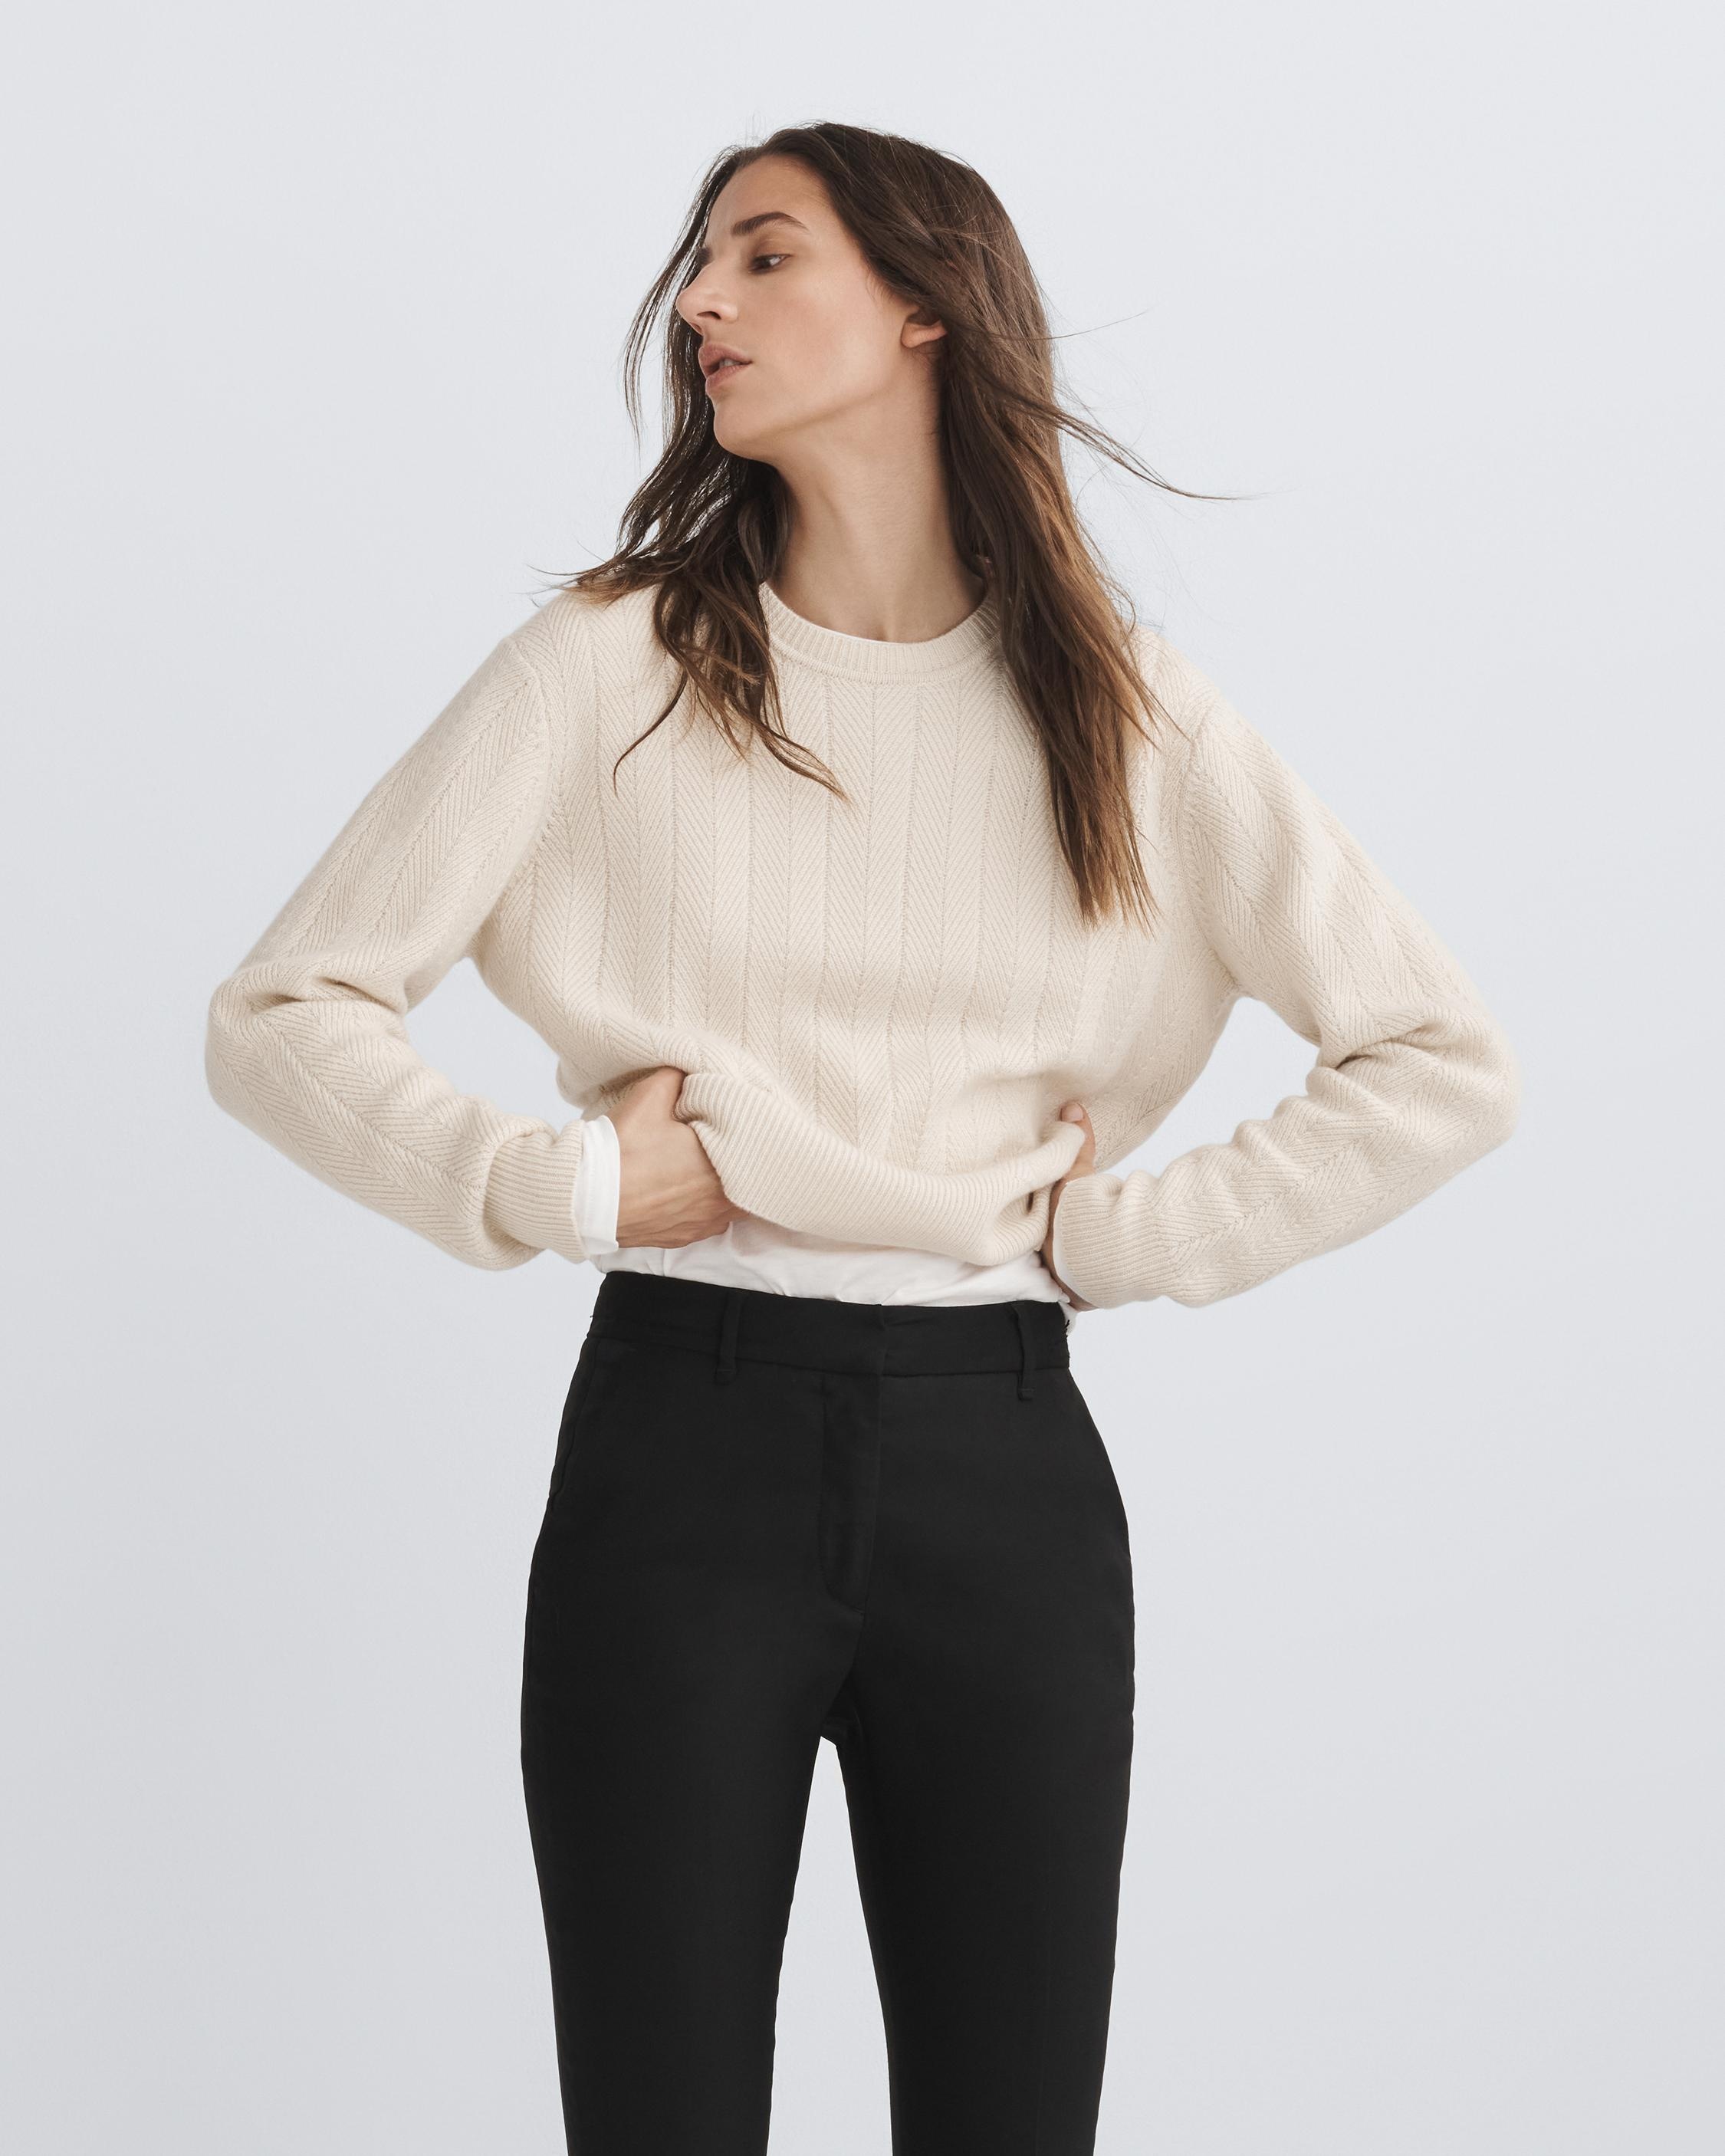 Durham Cashmere Crew
Relaxed Fit Sweater - 2